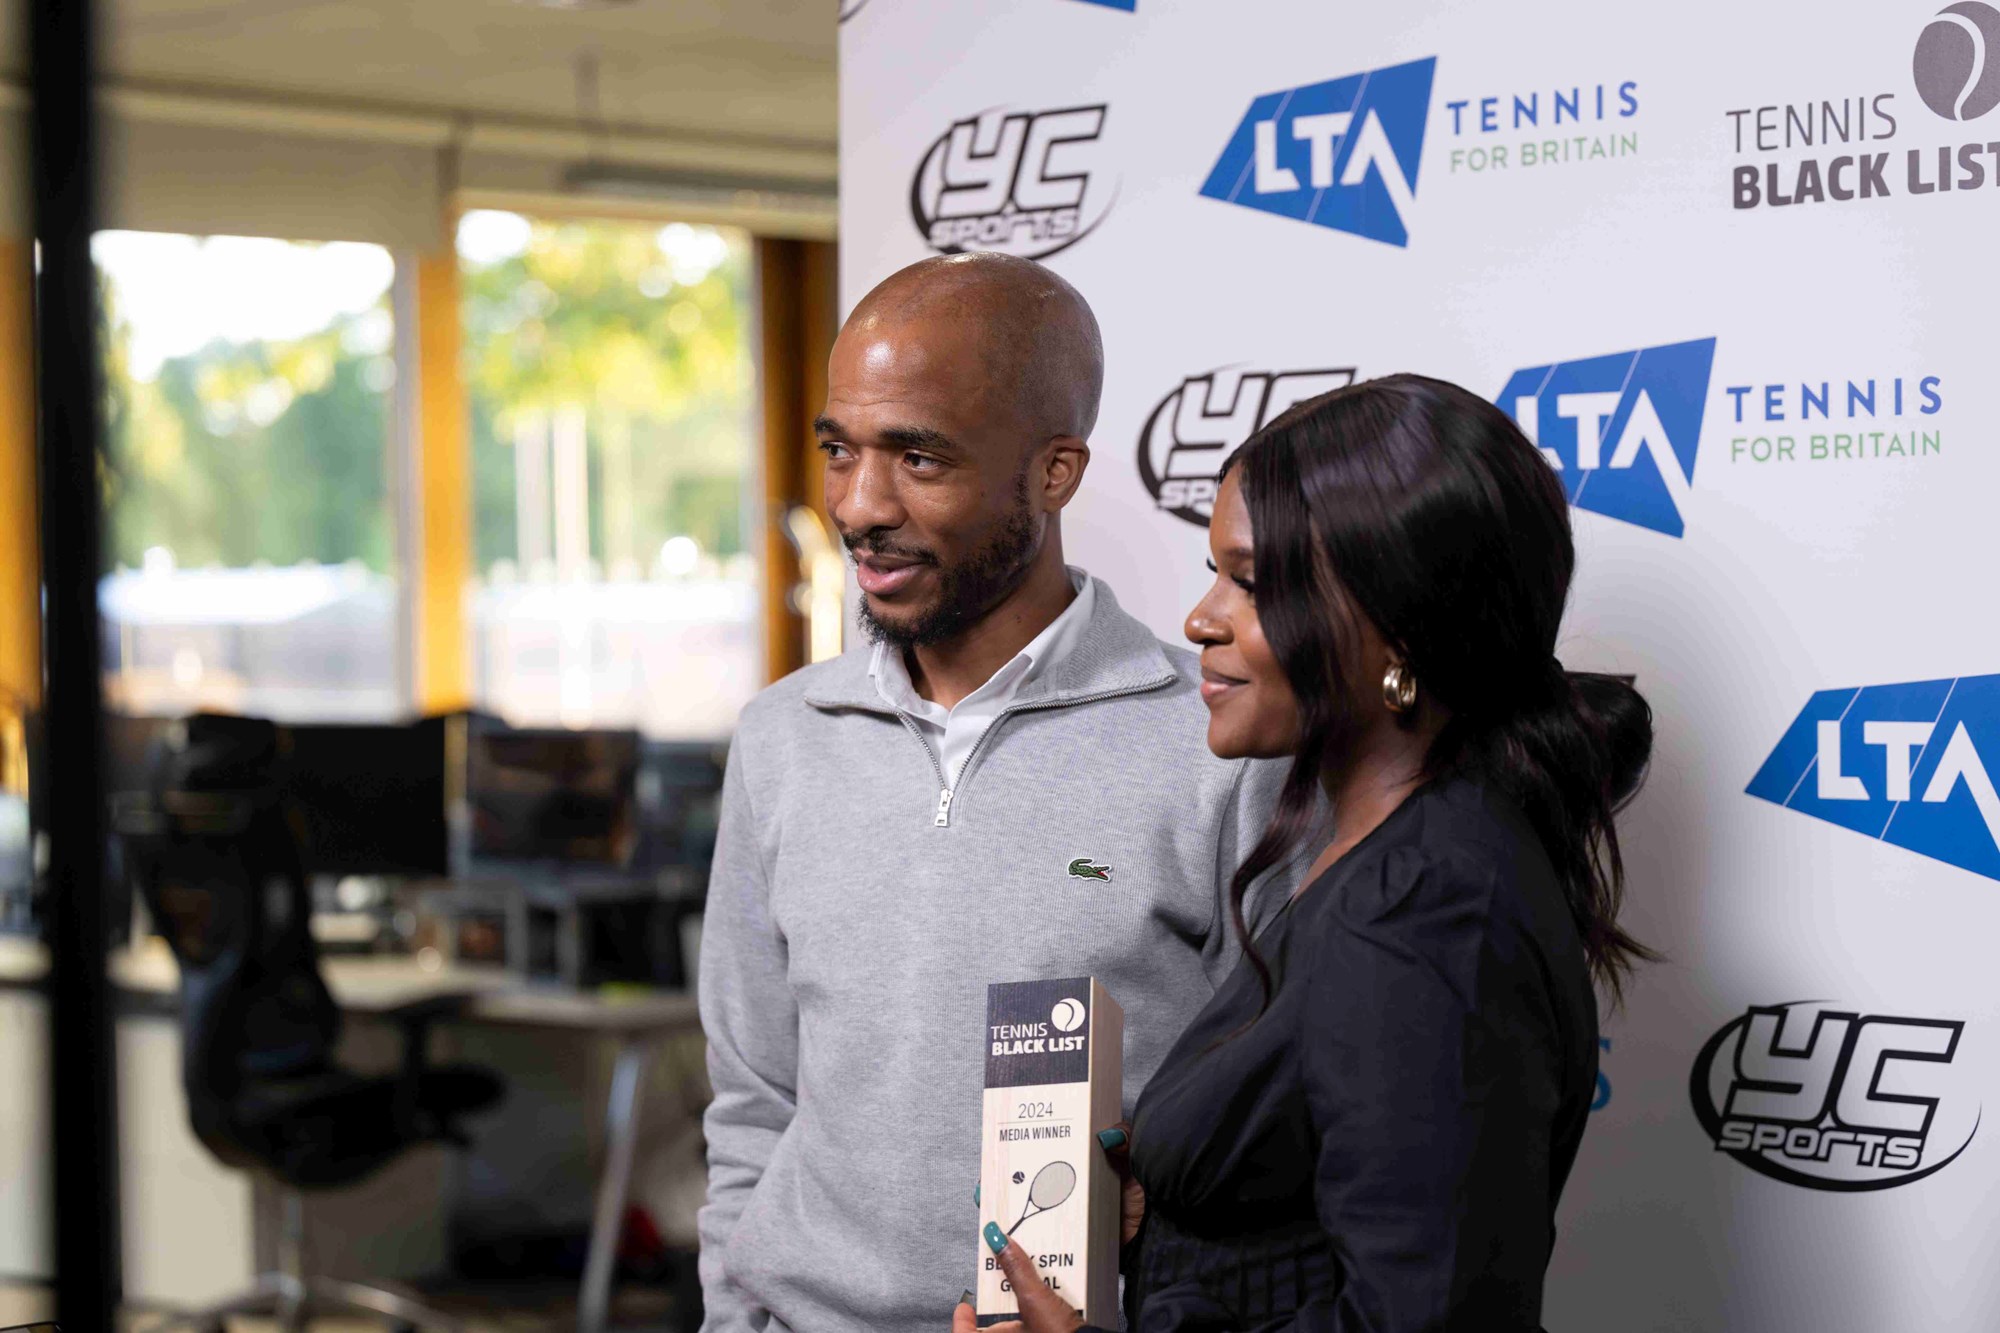 Hosts of the Black Spin Podcast holding their award while smiling at the Tennis Black List Awards